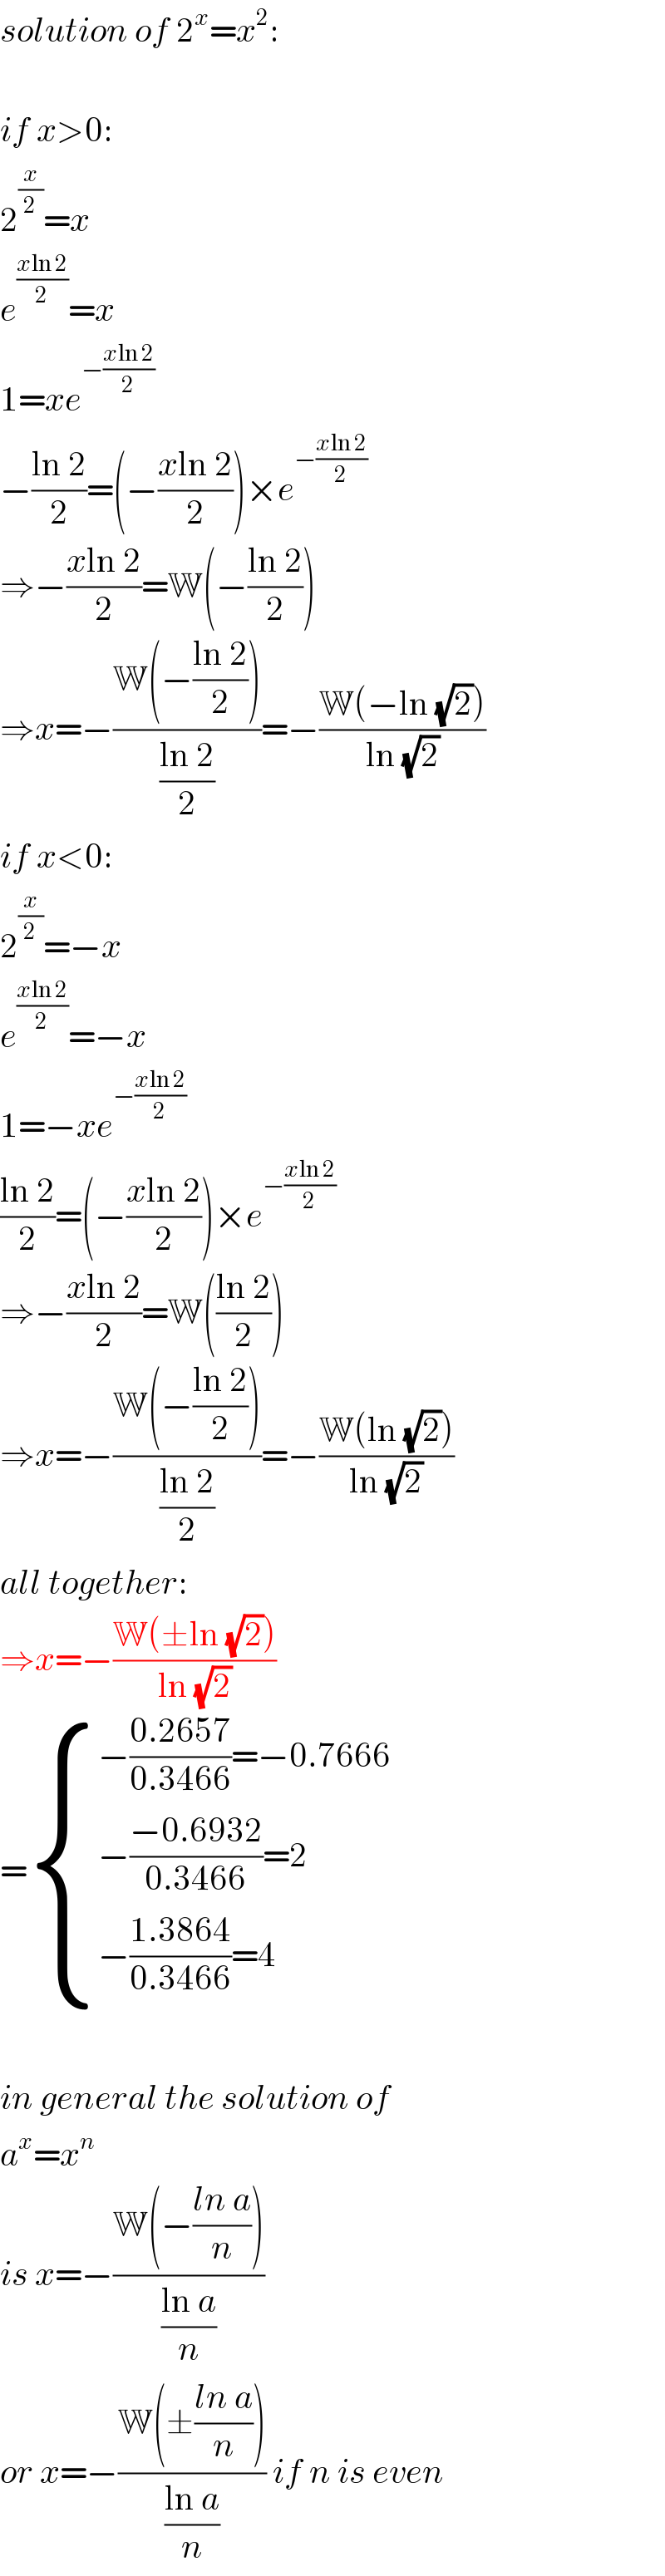 solution of 2^x =x^2 :    if x>0:  2^(x/2) =x  e^((xln 2)/2) =x  1=xe^(−((xln 2)/2))   −((ln 2)/2)=(−((xln 2)/2))×e^(−((xln 2)/2))   ⇒−((xln 2)/2)=W(−((ln 2)/2))  ⇒x=−((W(−((ln 2)/2)))/((ln 2)/2))=−((W(−ln (√2)))/(ln (√2)))  if x<0:  2^(x/2) =−x  e^((xln 2)/2) =−x  1=−xe^(−((xln 2)/2))   ((ln 2)/2)=(−((xln 2)/2))×e^(−((xln 2)/2))   ⇒−((xln 2)/2)=W(((ln 2)/2))  ⇒x=−((W(−((ln 2)/2)))/((ln 2)/2))=−((W(ln (√2)))/(ln (√2)))  all together:  ⇒x=−((W(±ln (√2)))/(ln (√2)))  = { ((−((0.2657)/(0.3466))=−0.7666)),((−((−0.6932)/(0.3466))=2)),((−((1.3864)/(0.3466))=4)) :}    in general the solution of  a^x =x^n   is x=−((W(−((ln a)/n)))/((ln a)/n))  or x=−((W(±((ln a)/n)))/((ln a)/n)) if n is even  